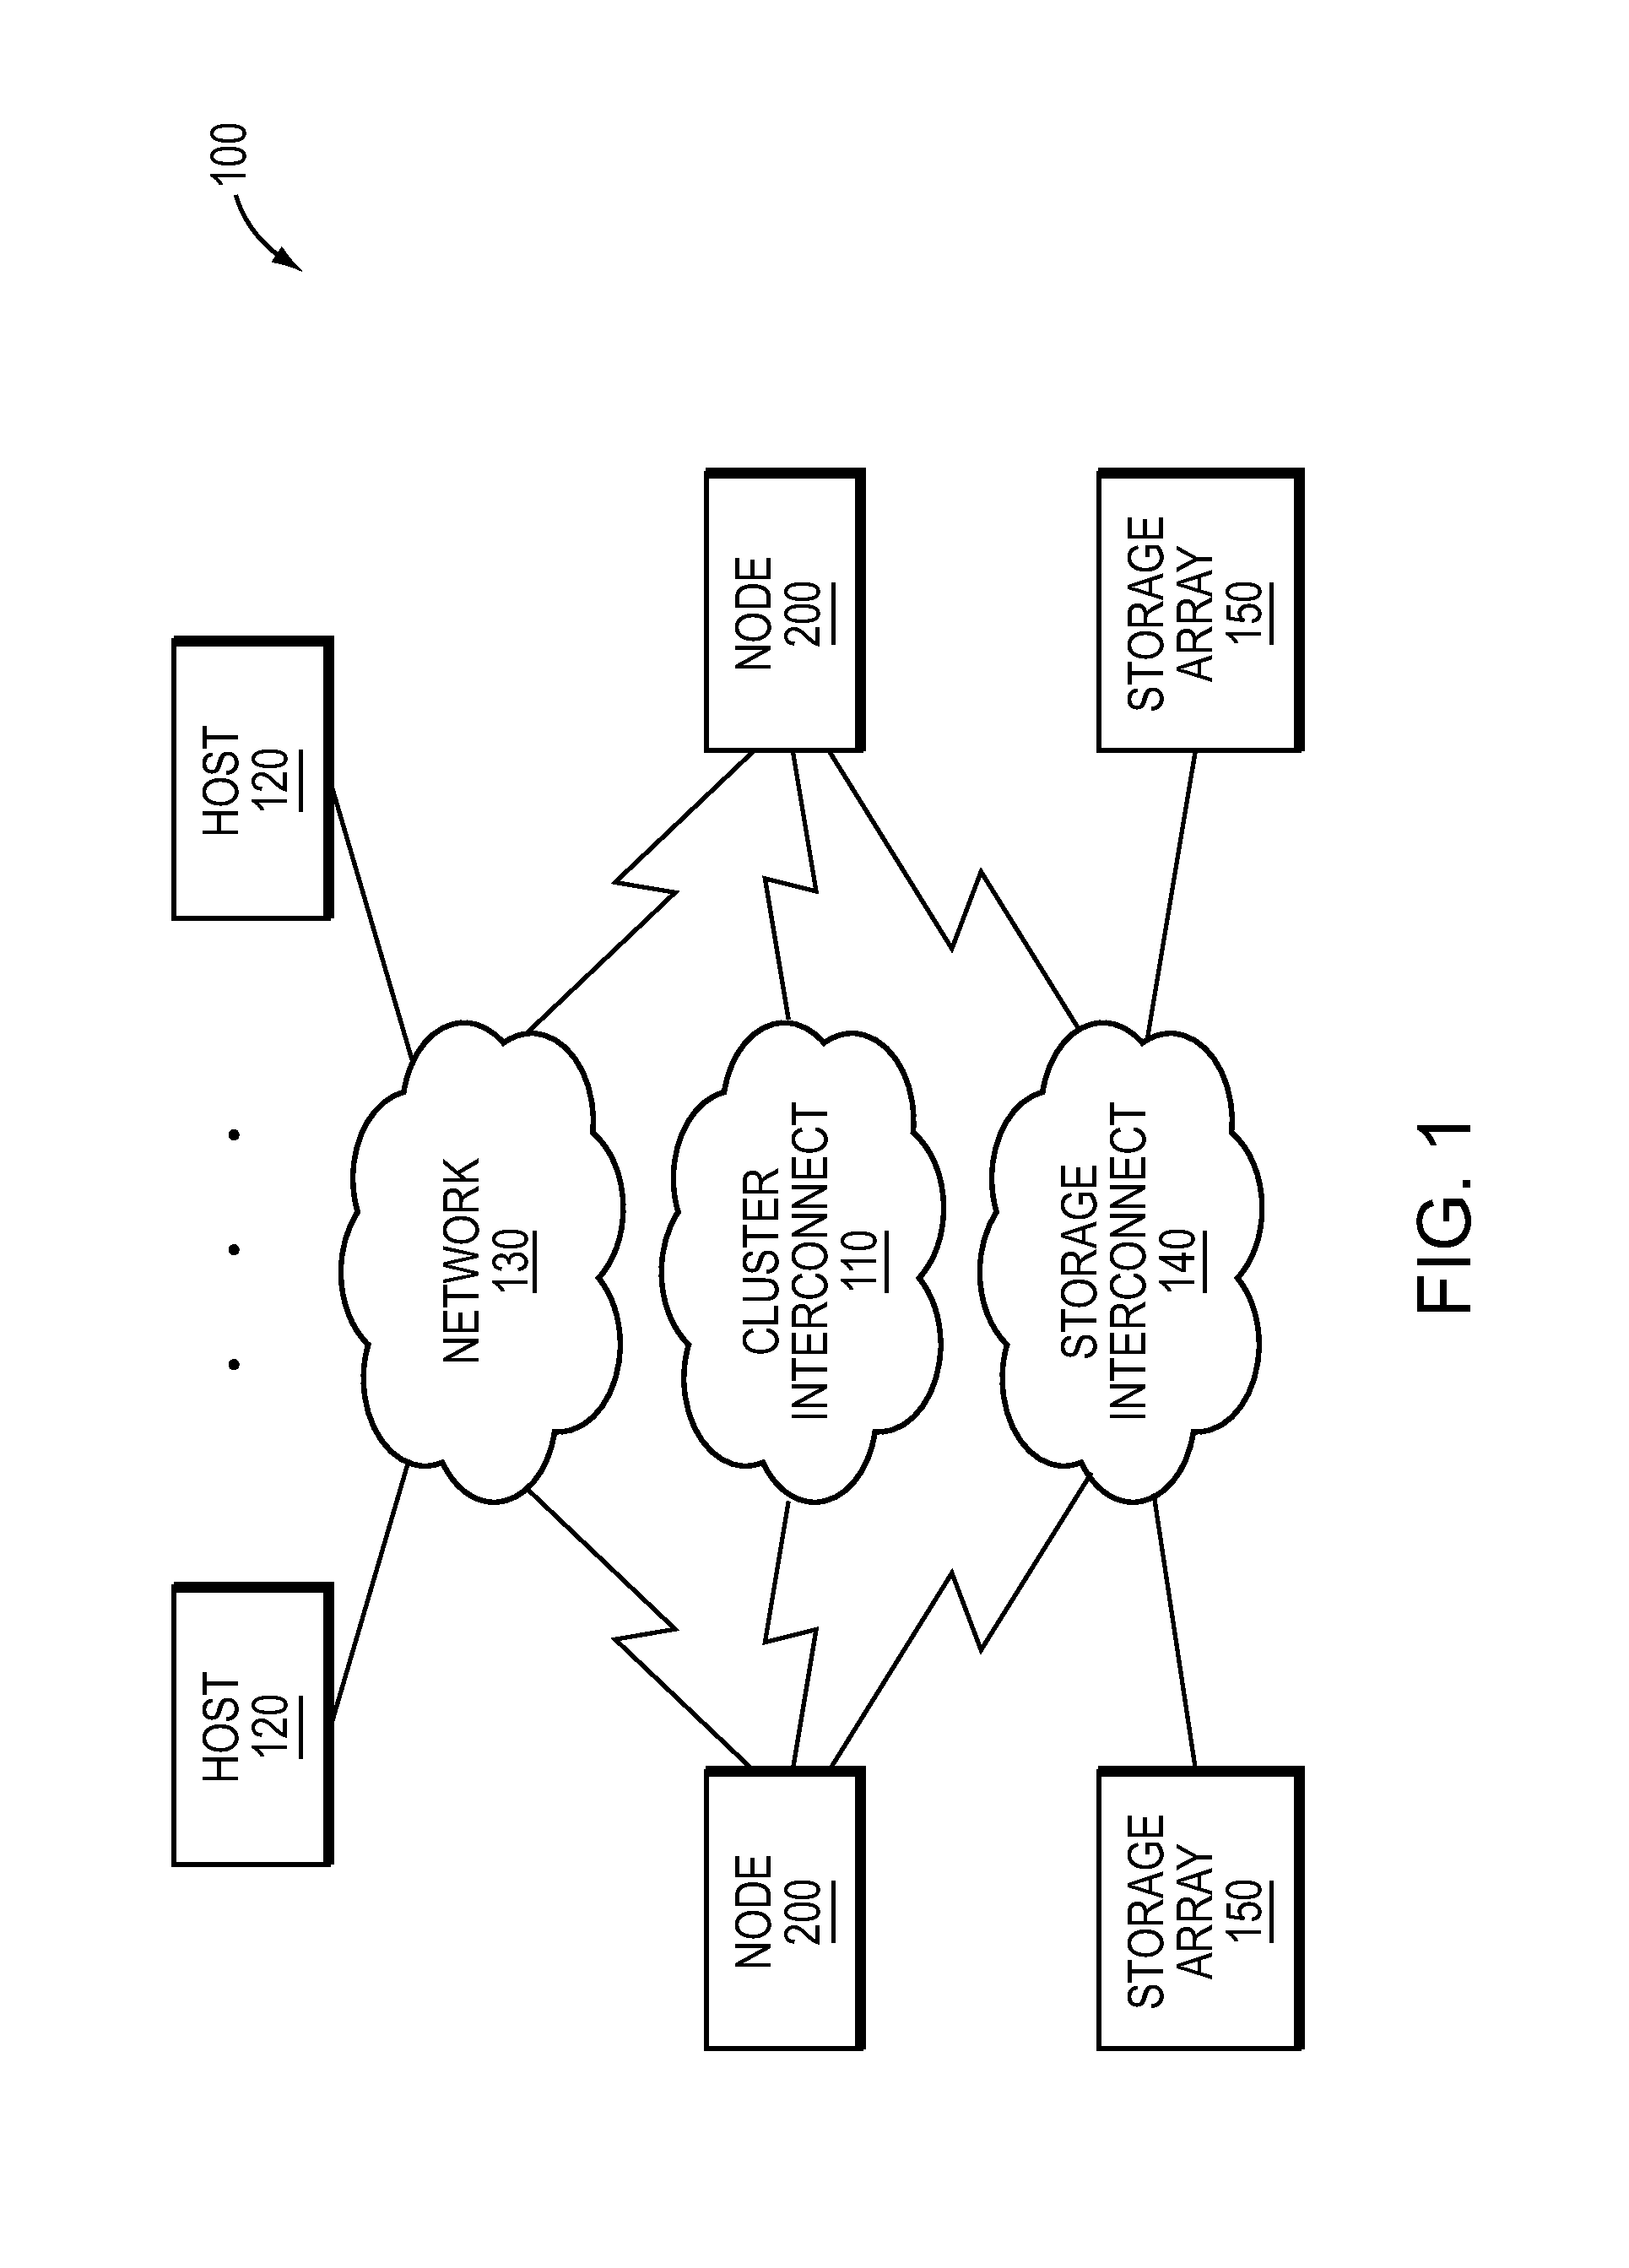 Set-associative hash table organization for efficient storage and retrieval of data in a storage system